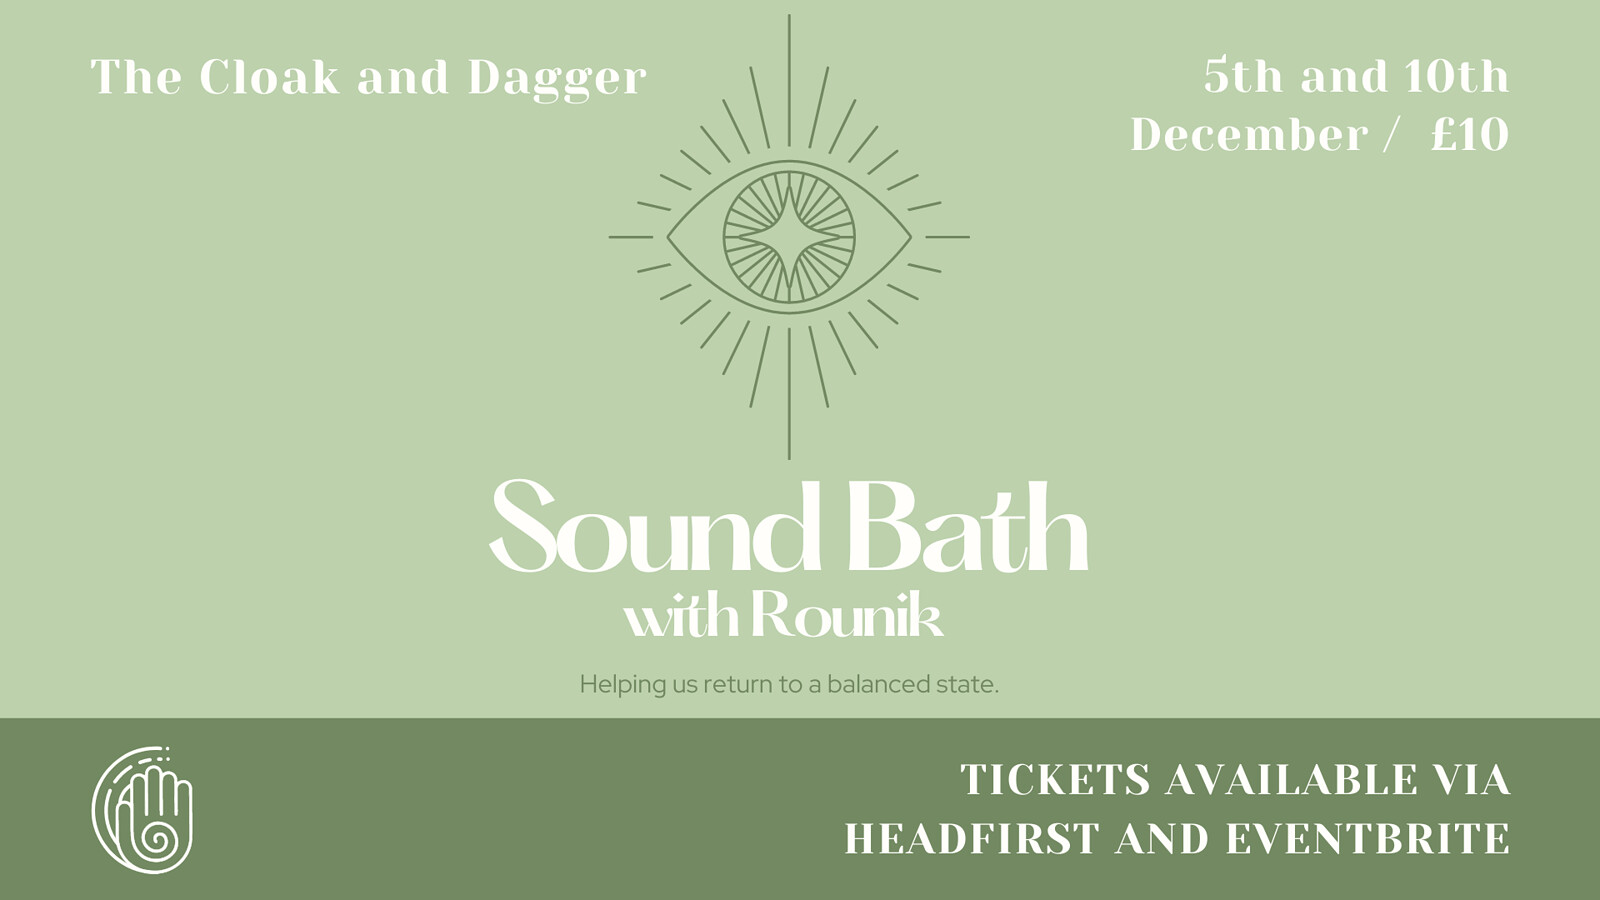 Sound Bath with Rounik at The Cloak and Dagger